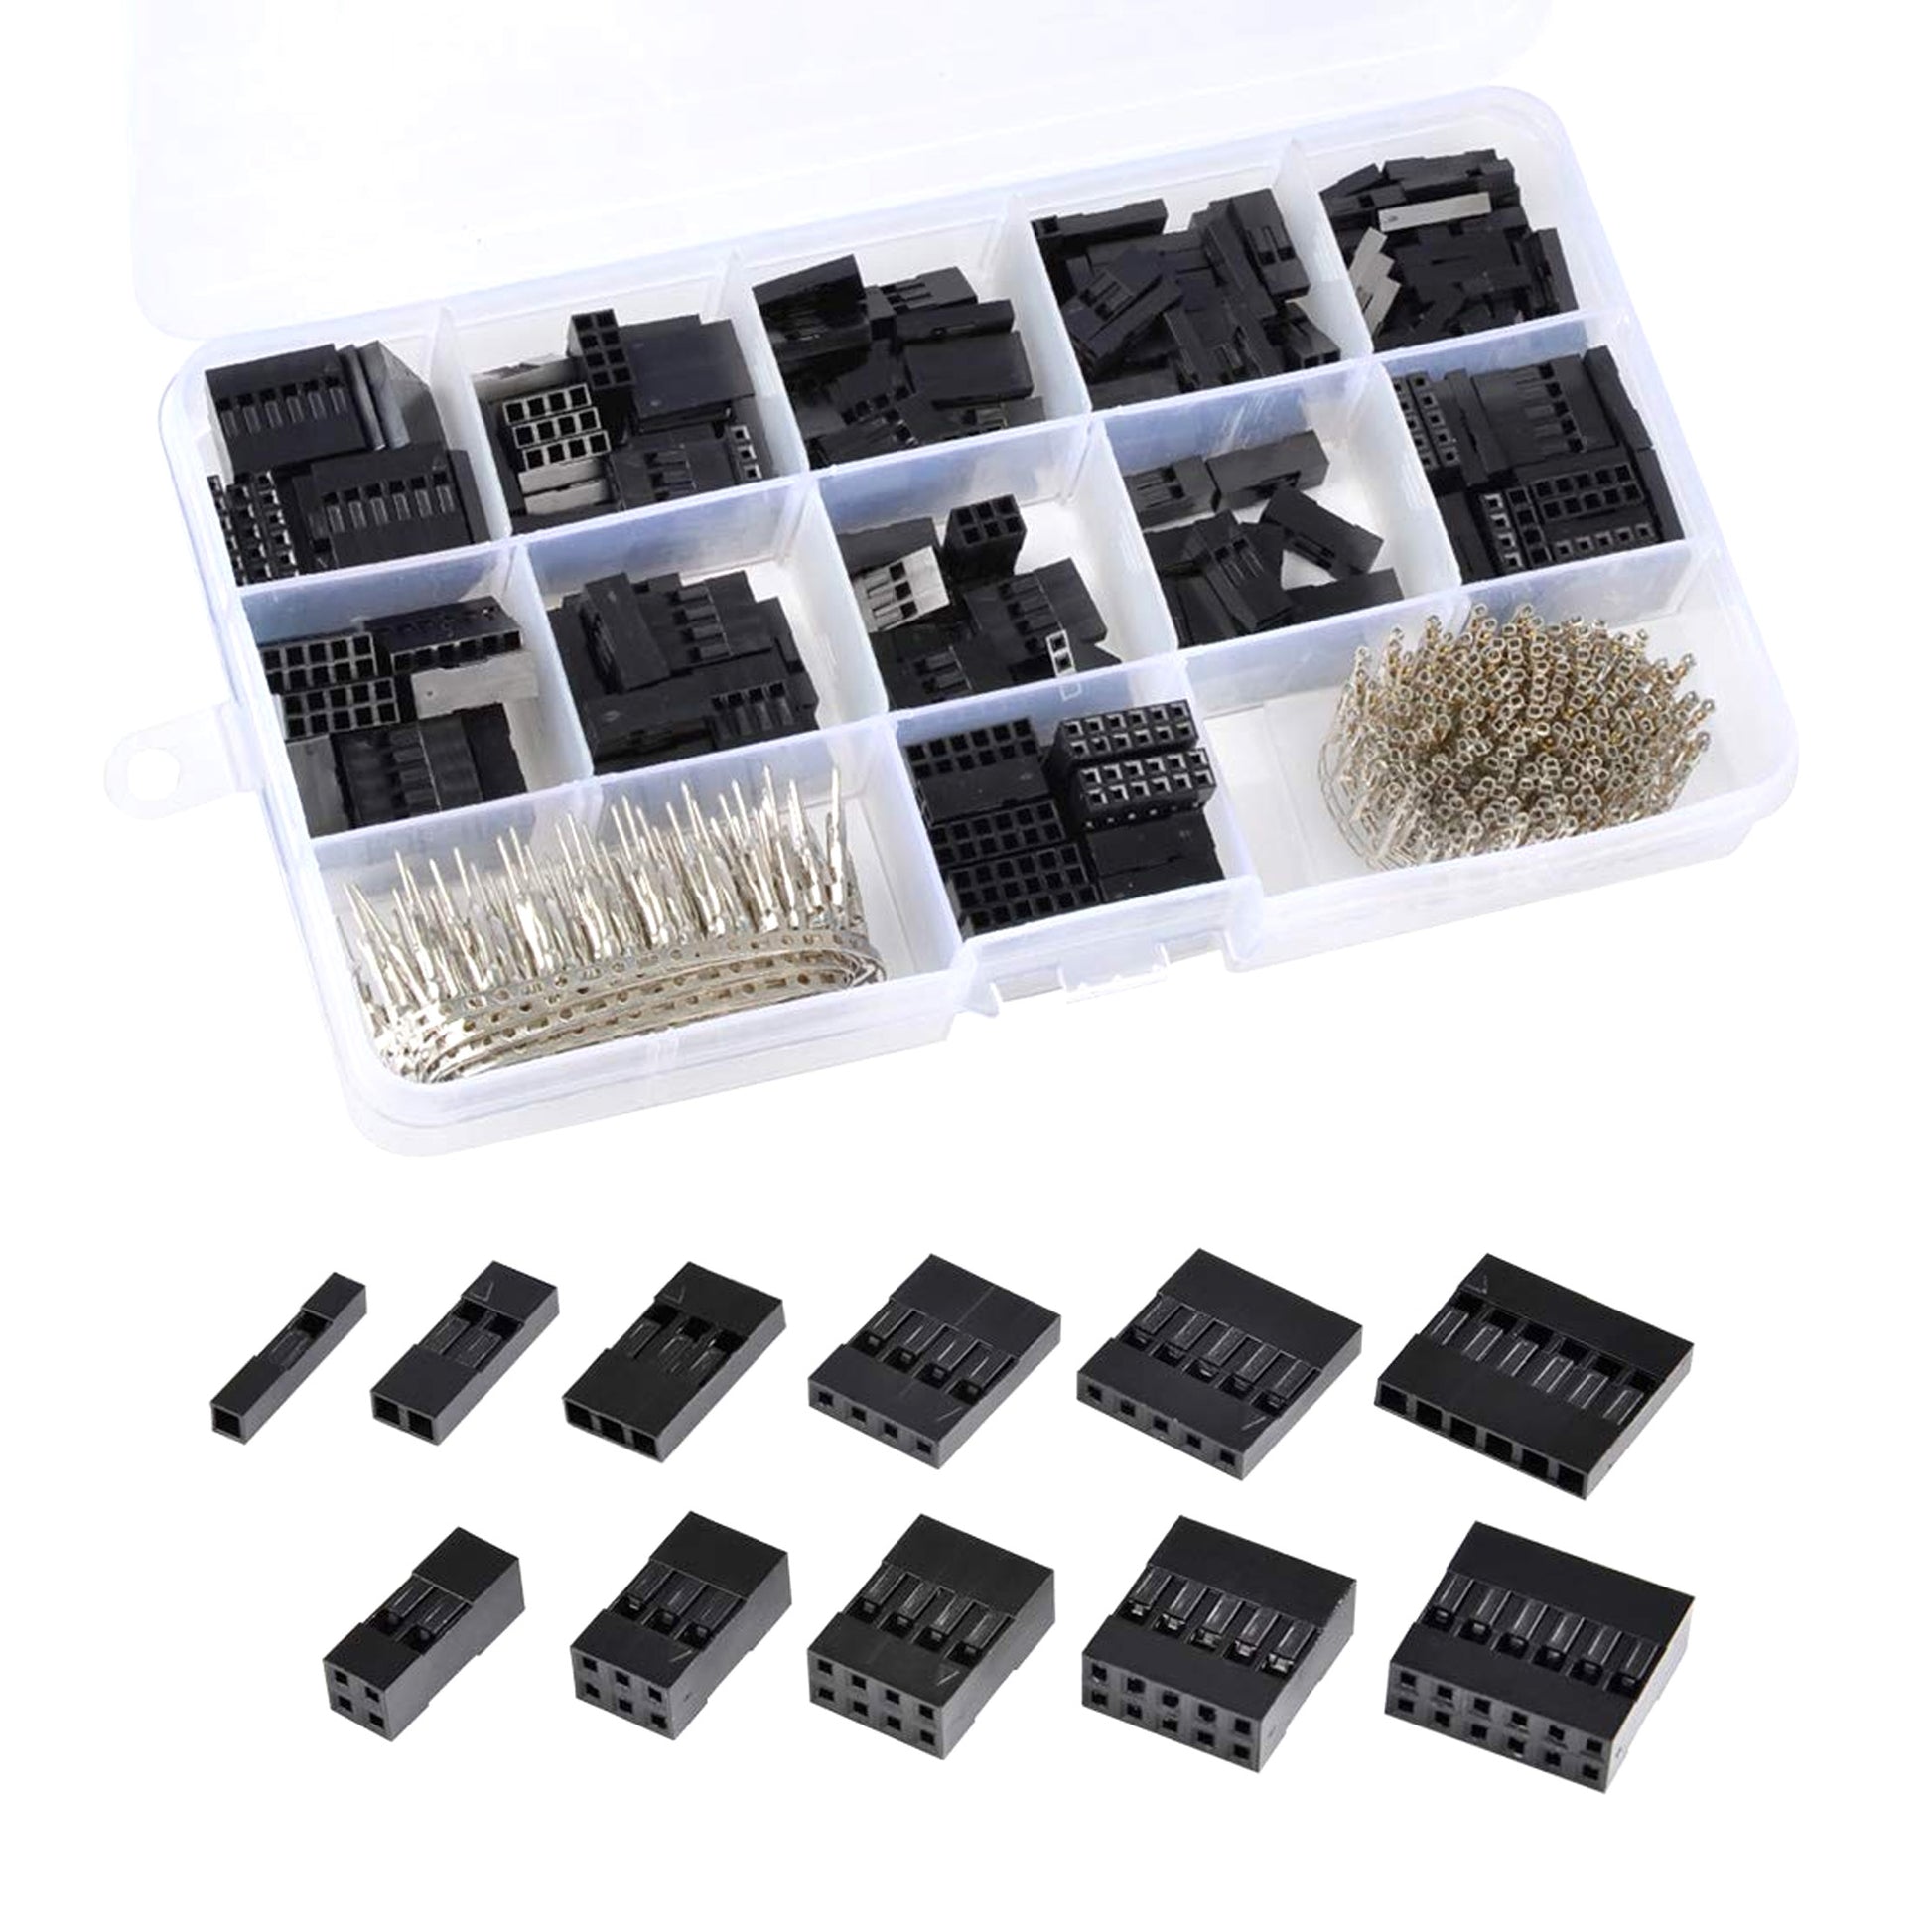 620Pcs 2.54mm Housing Connector Dupont Connector Male Female Crimp Pins Adaptor Assortment JST Connector Kit - RS1136 - REES52